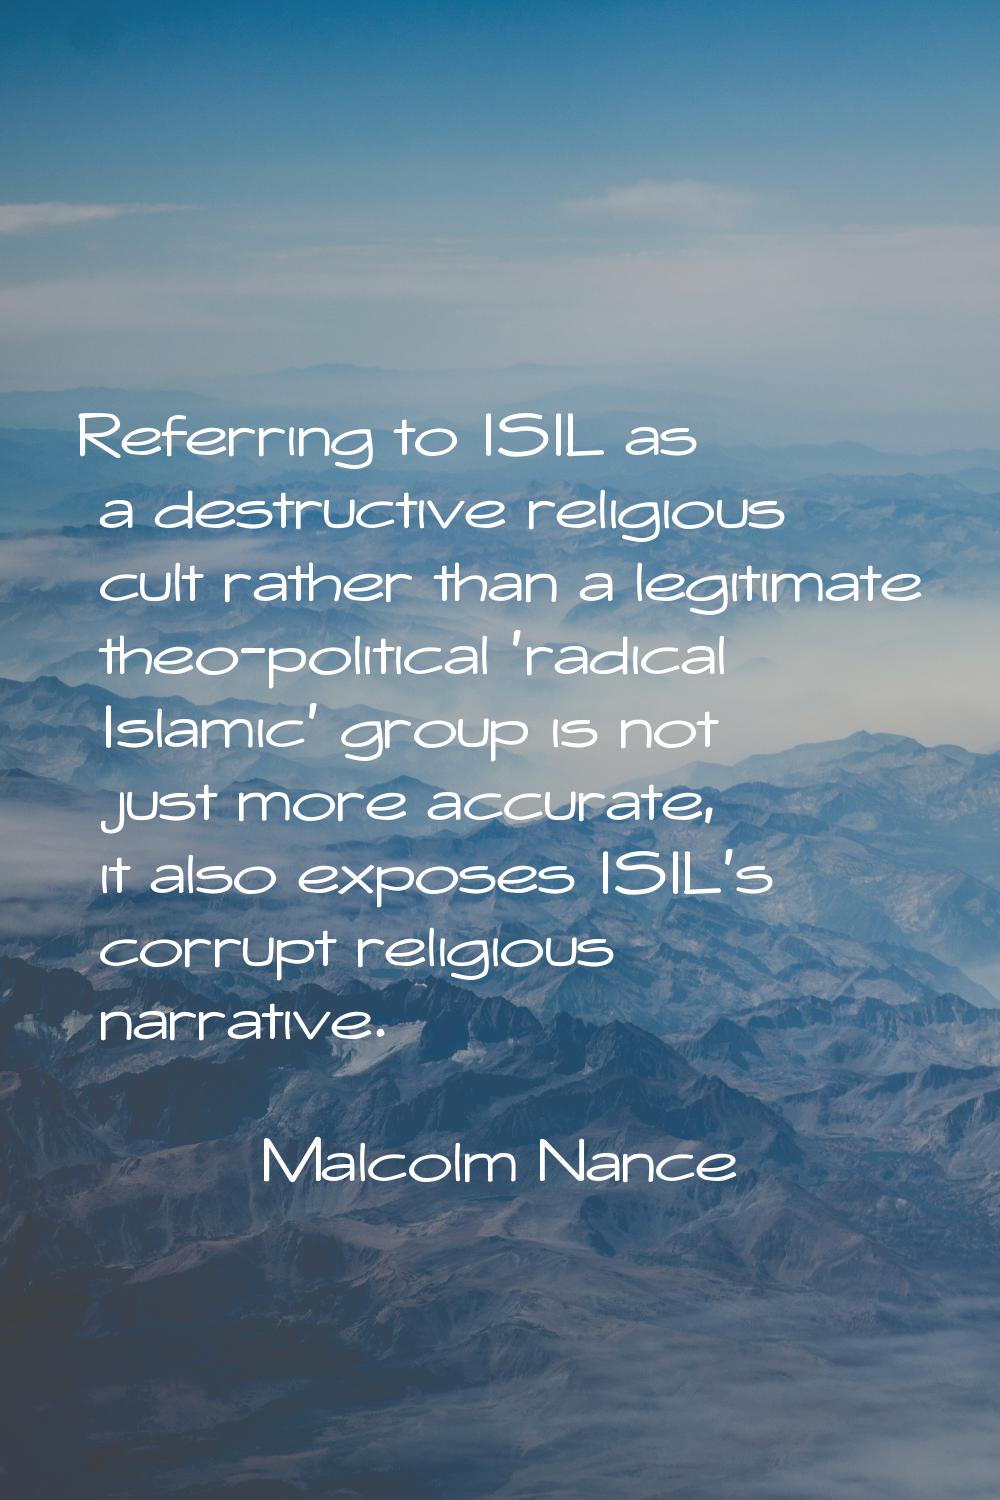 Referring to ISIL as a destructive religious cult rather than a legitimate theo-political 'radical 